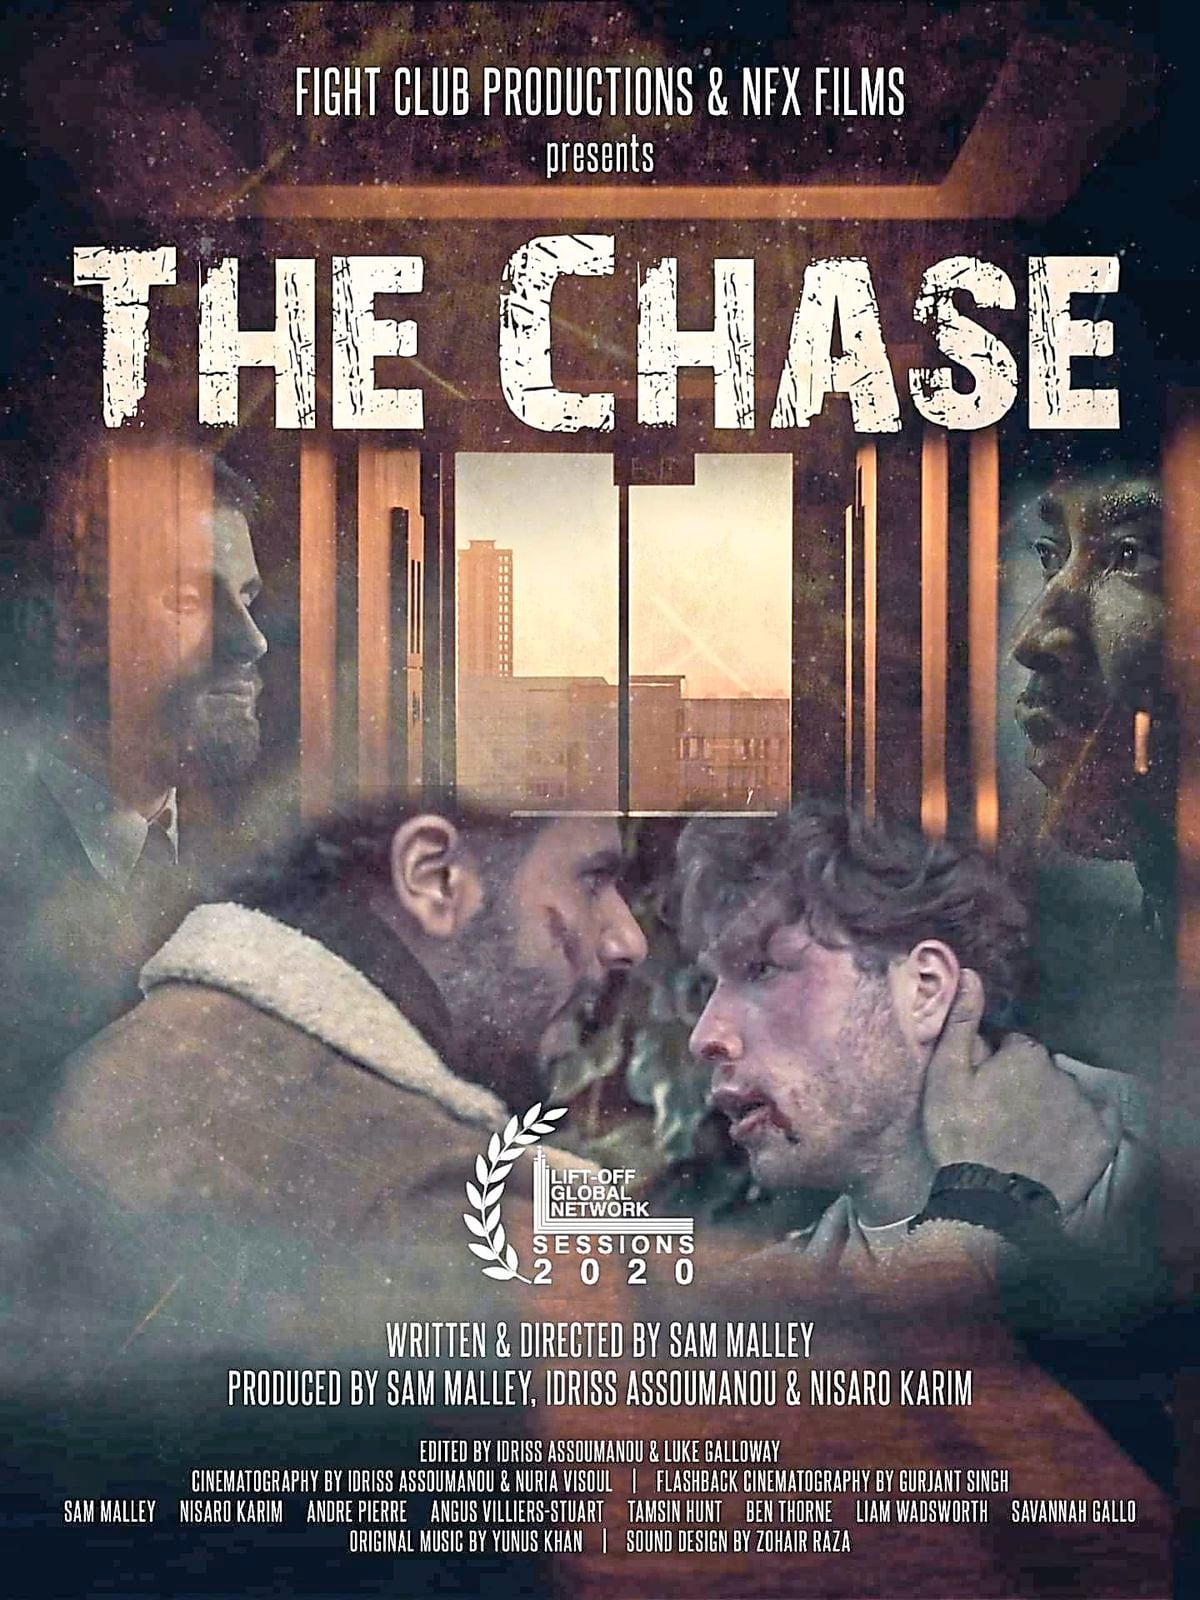 The Chase has received five-star reviews